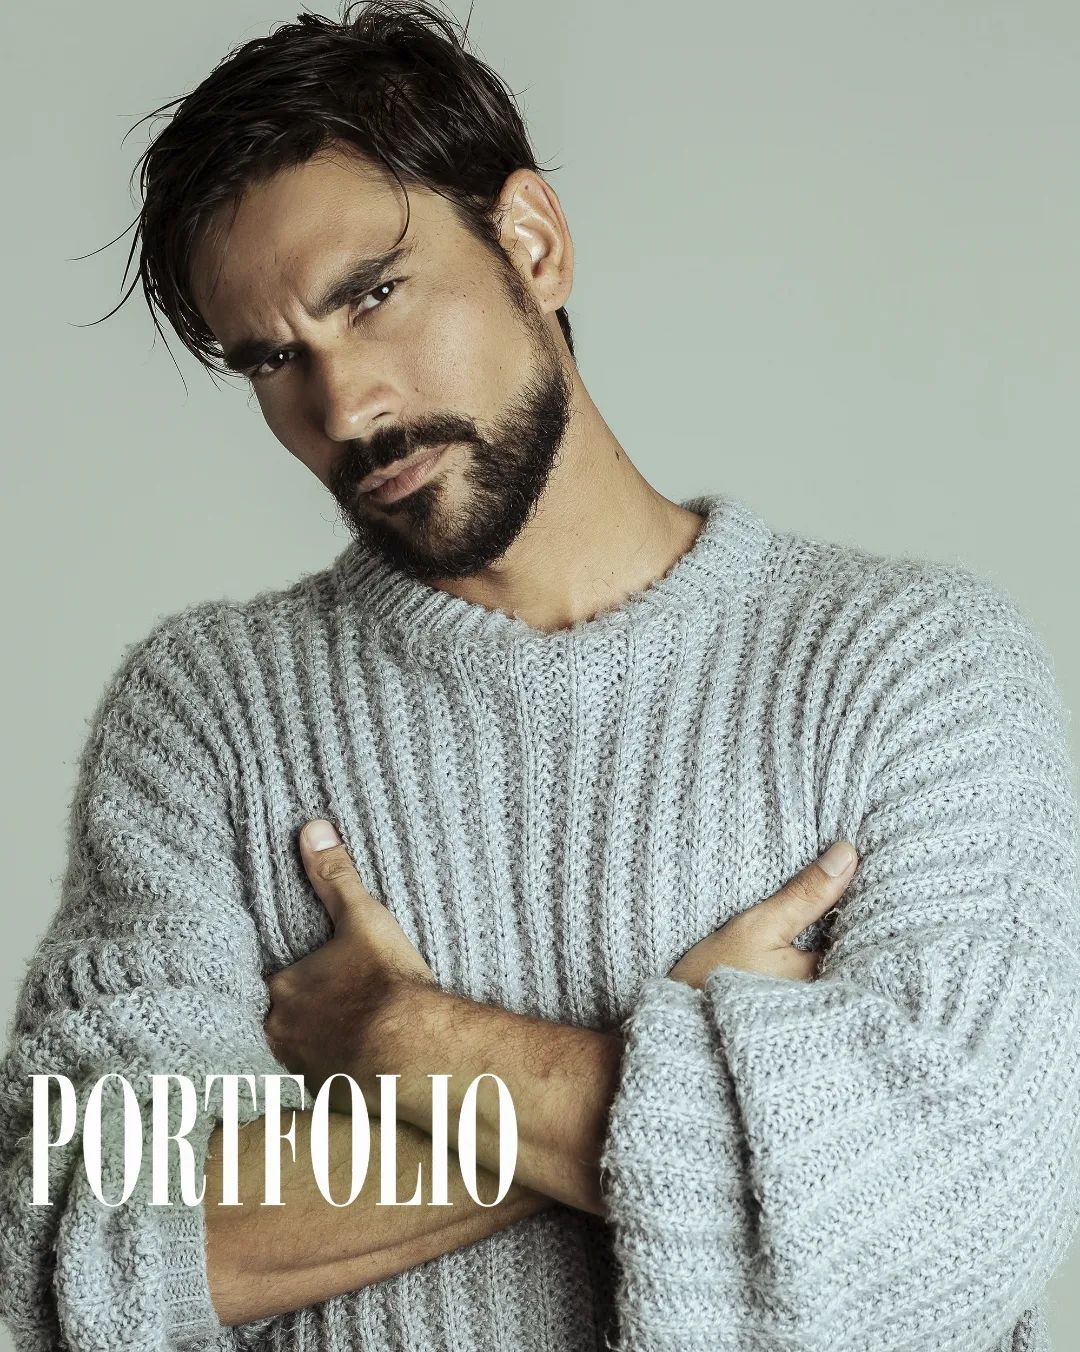 https://f.radikal.host/2023/04/06/Photo-by-REVISTA-PORTFOLIO-BRAZIL-on-March-19-2023.-May-be-a-closeup-of-1-person-beard-and-text-that-says-PORTFOLIO..jpg